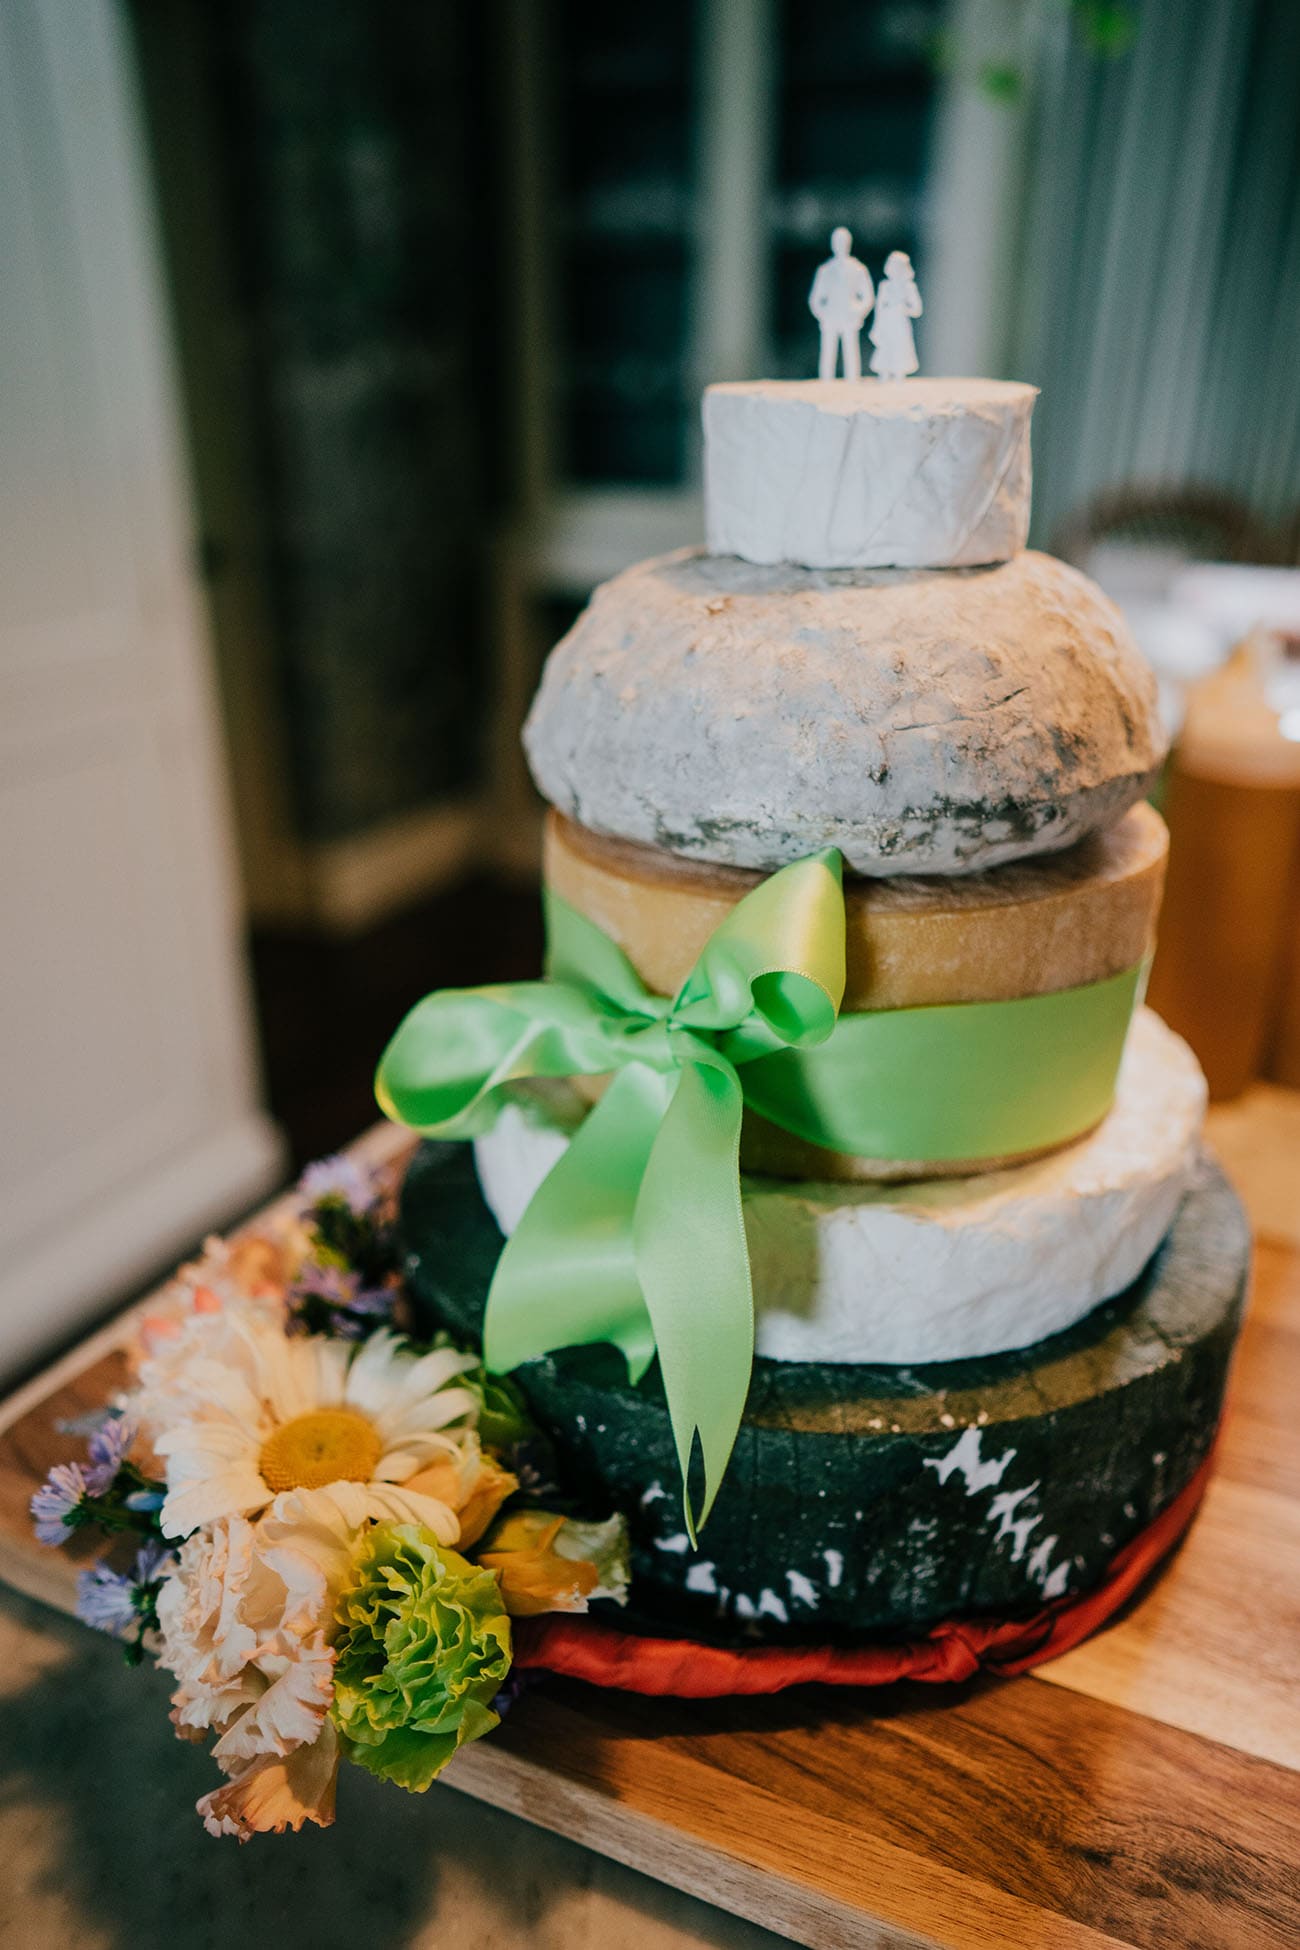 The wedding cake made of cheese